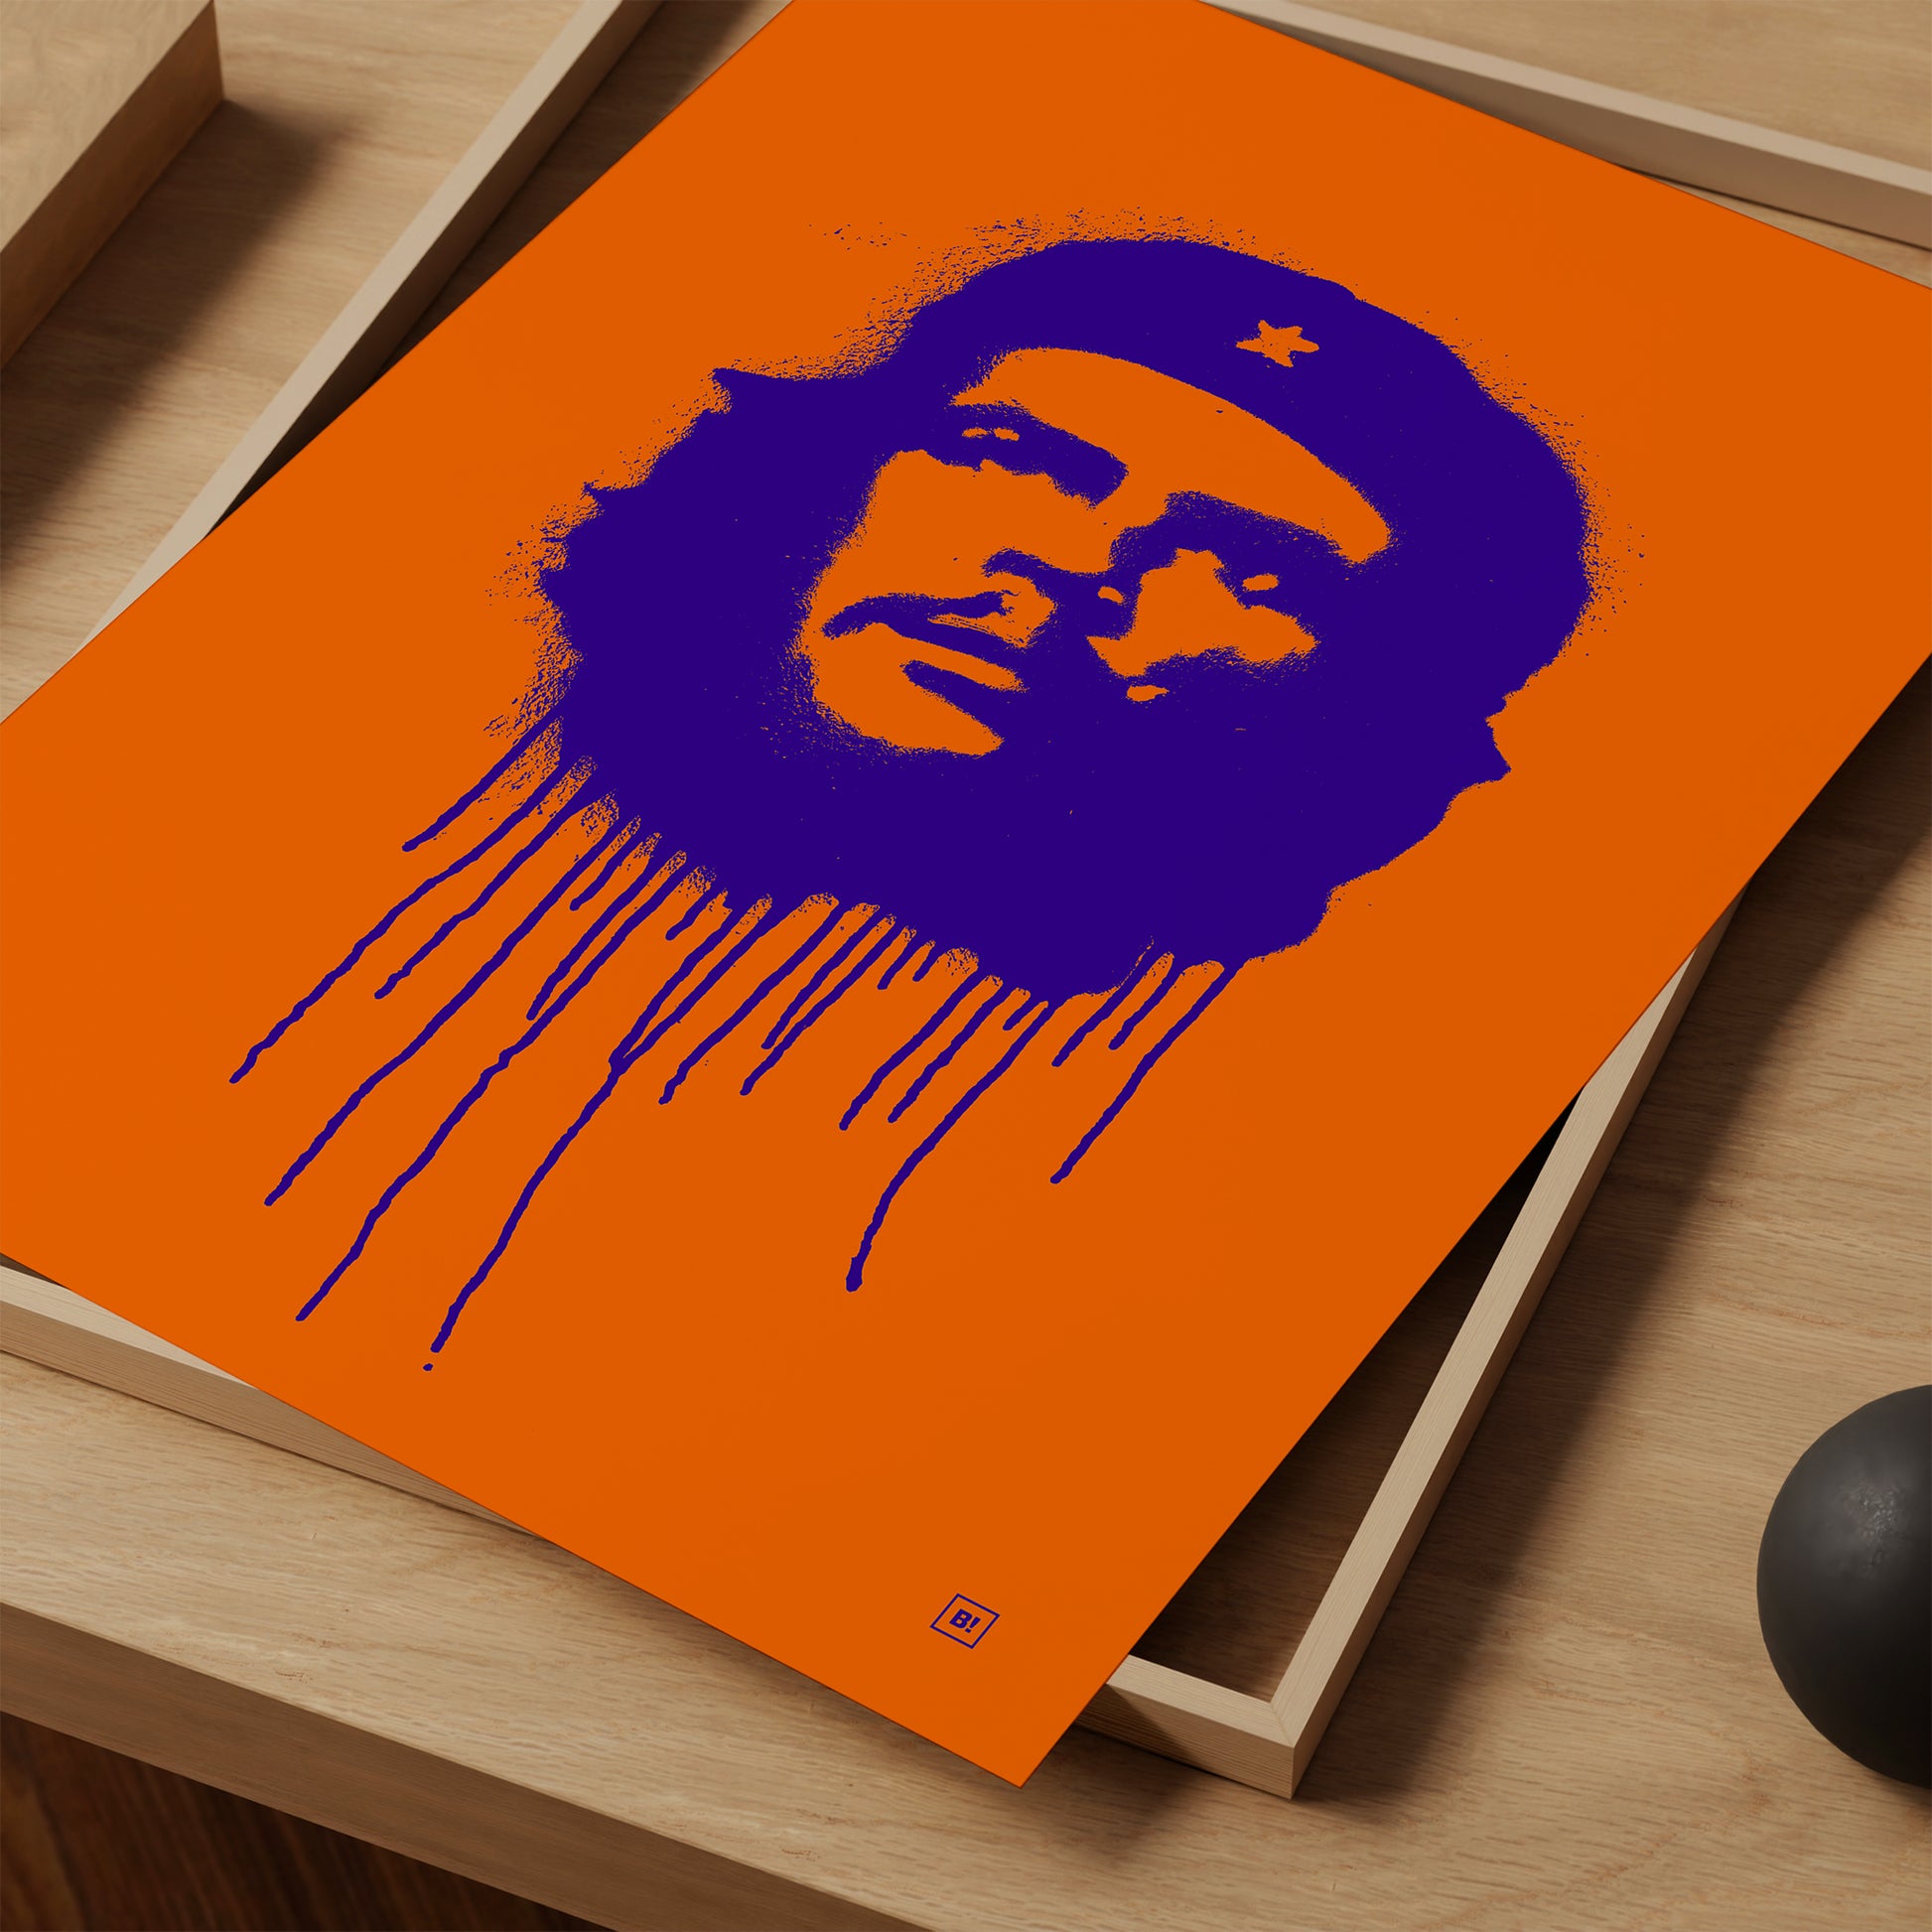 Be inspired by our pop navy "Ernesto Che Guevara" art print! This artwork was printed using the giclée process on archival acid-free paper and is presented as a print close-up, capturing its timeless beauty in every detail.